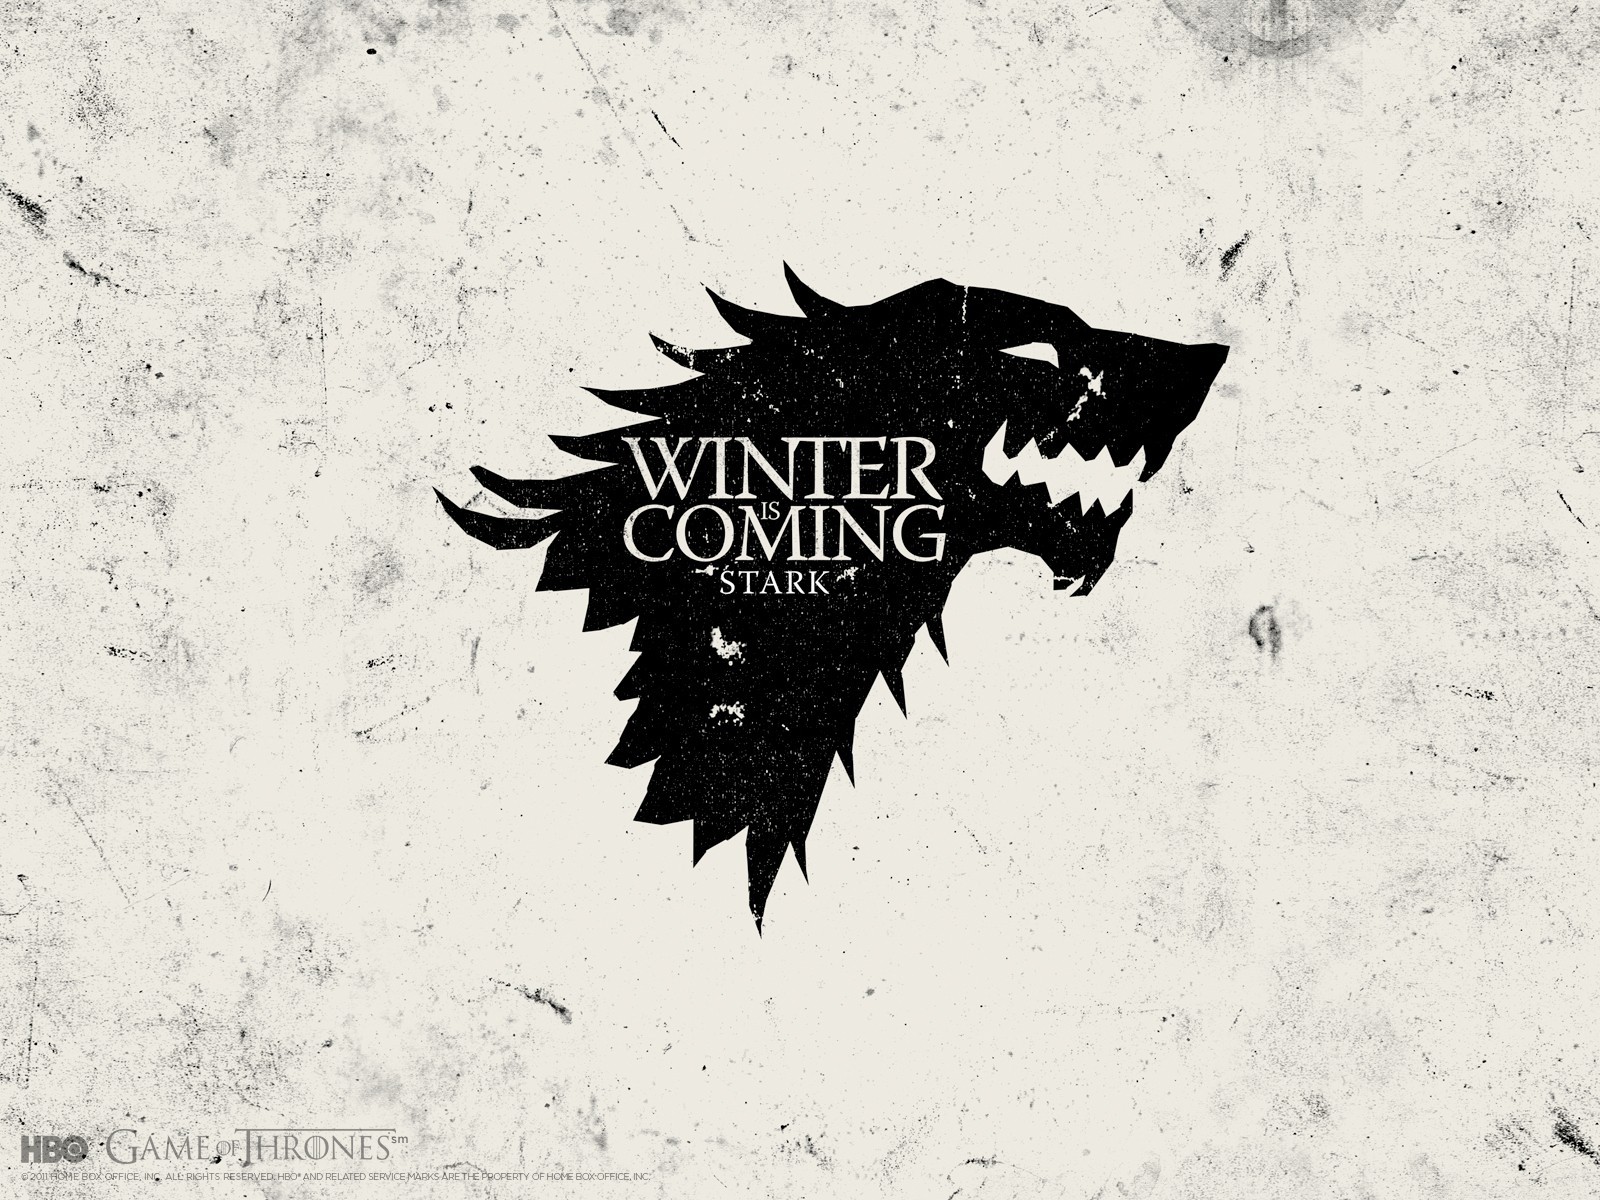 Game Of Thrones, A Song Of Ice And Fire, House Stark, Winter Is Coming, Sigils Wallpaper